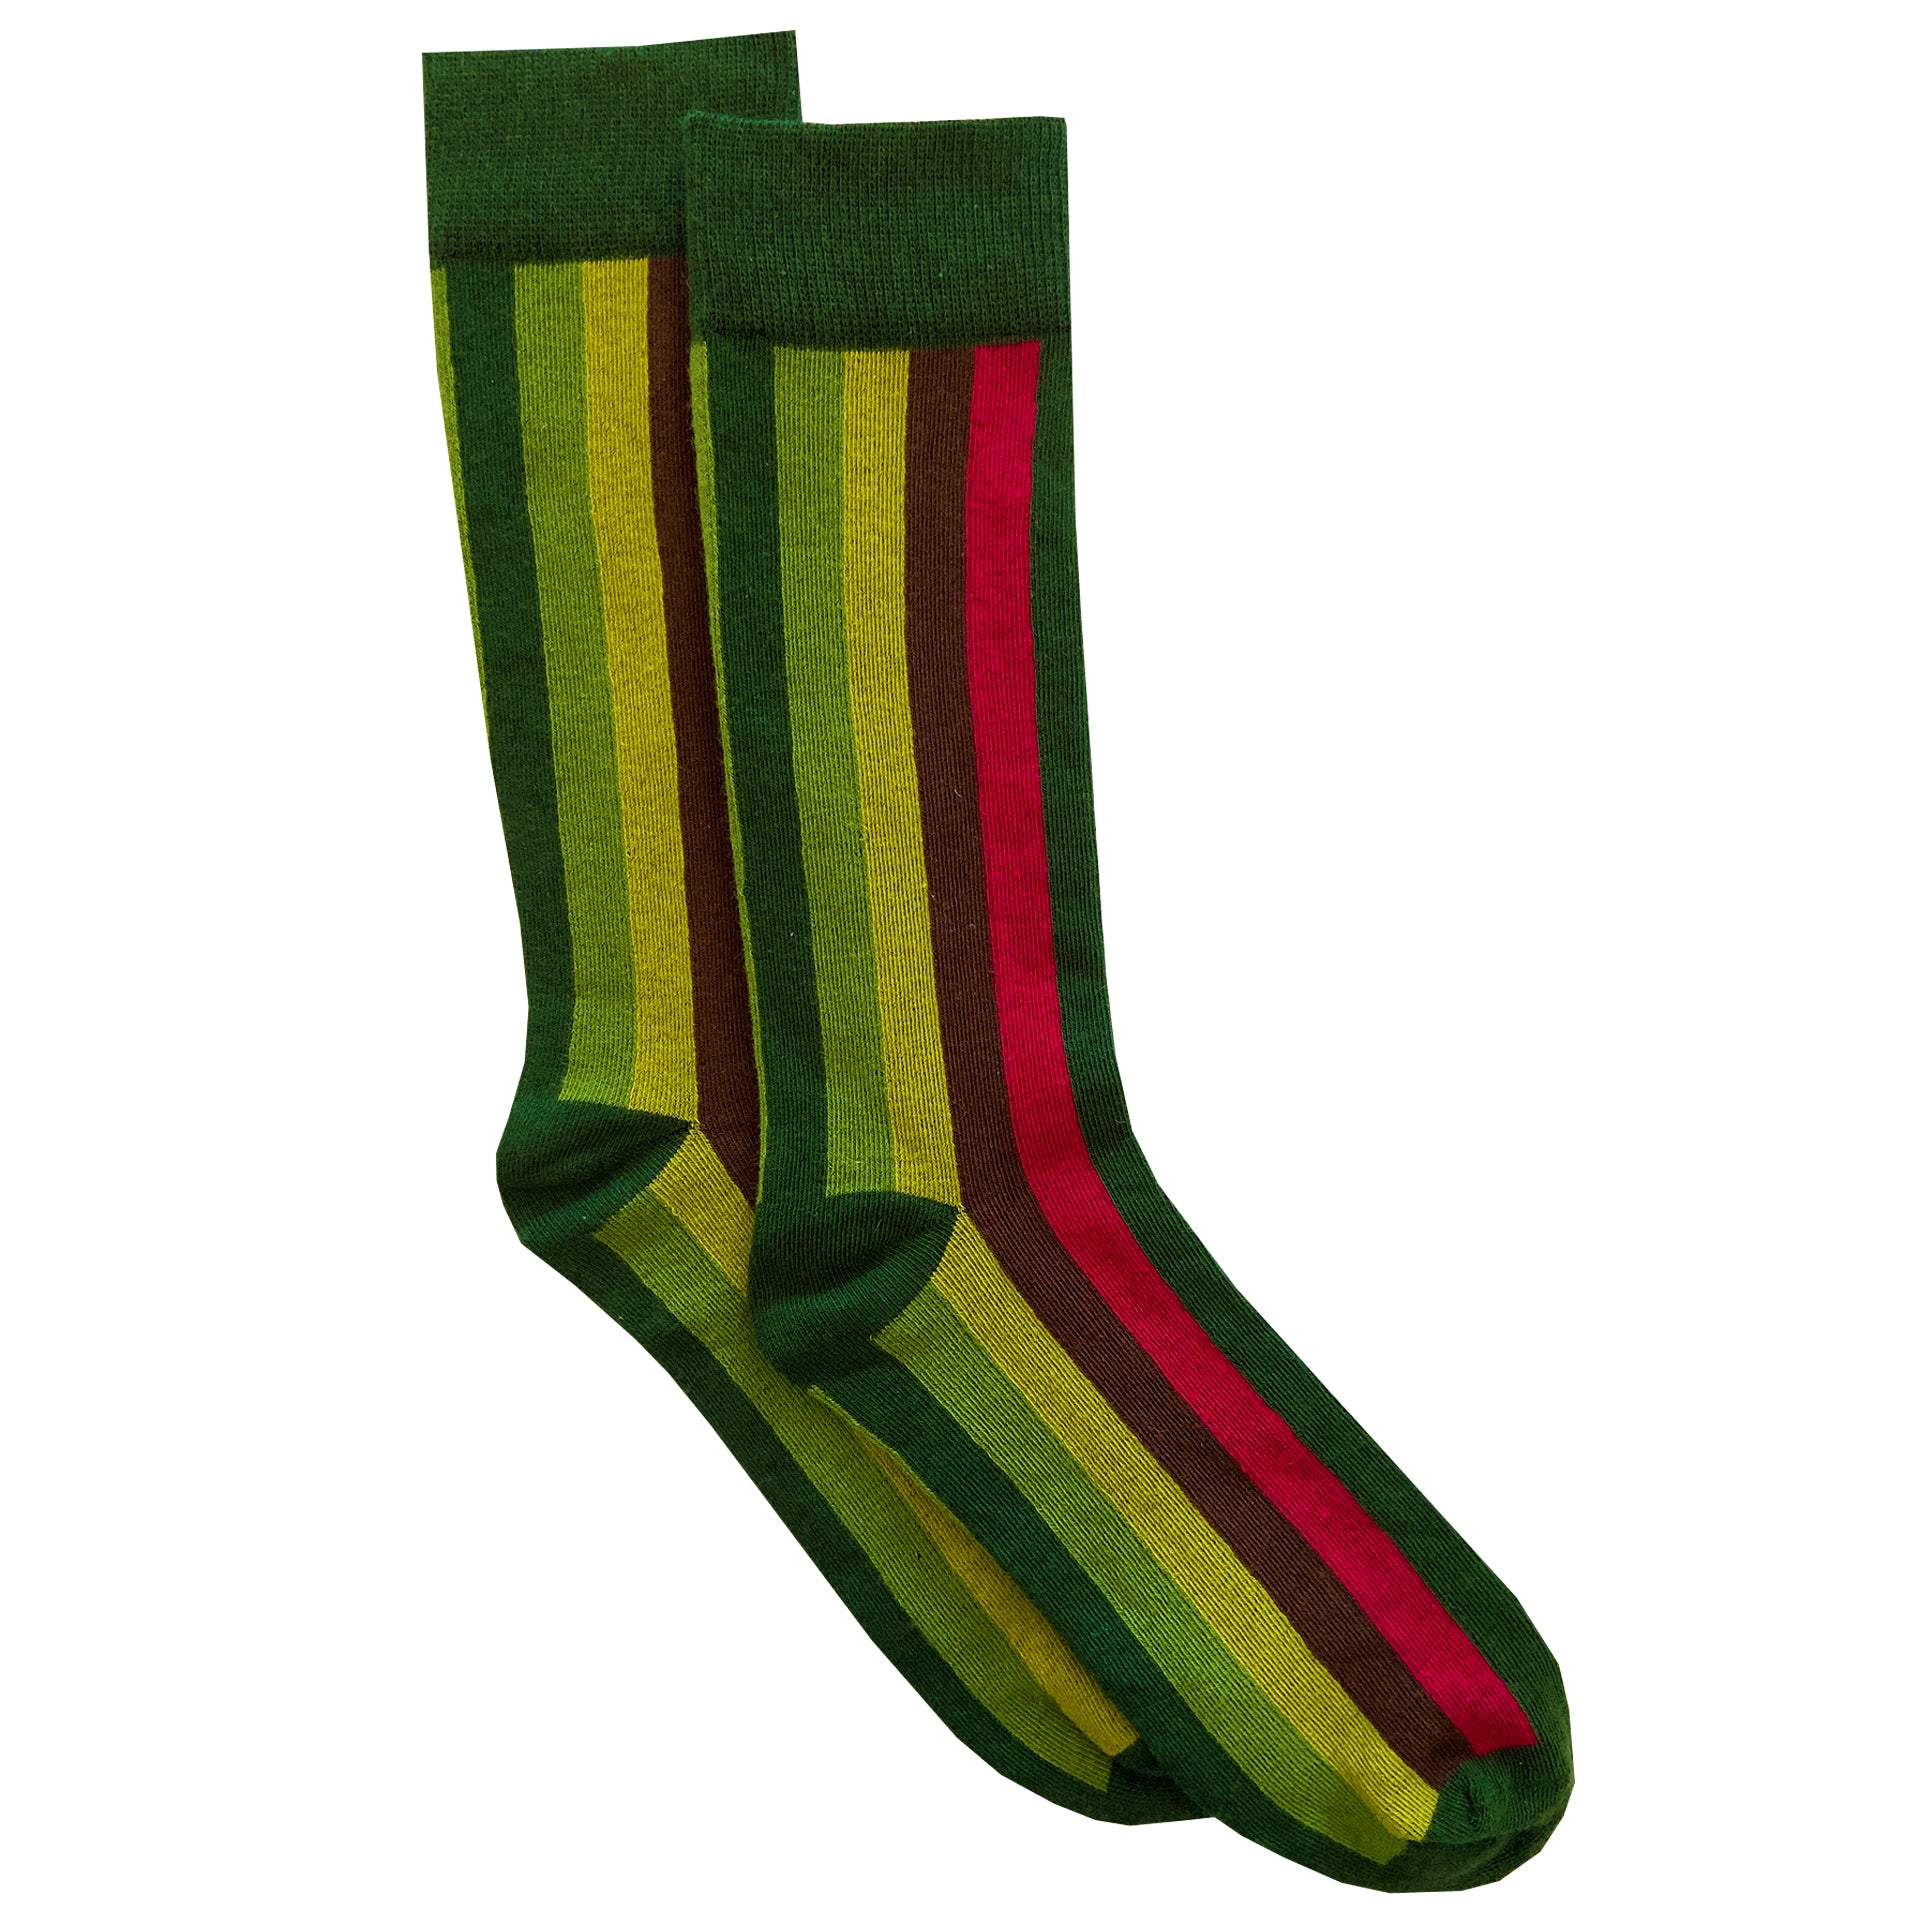 green and red striped socks